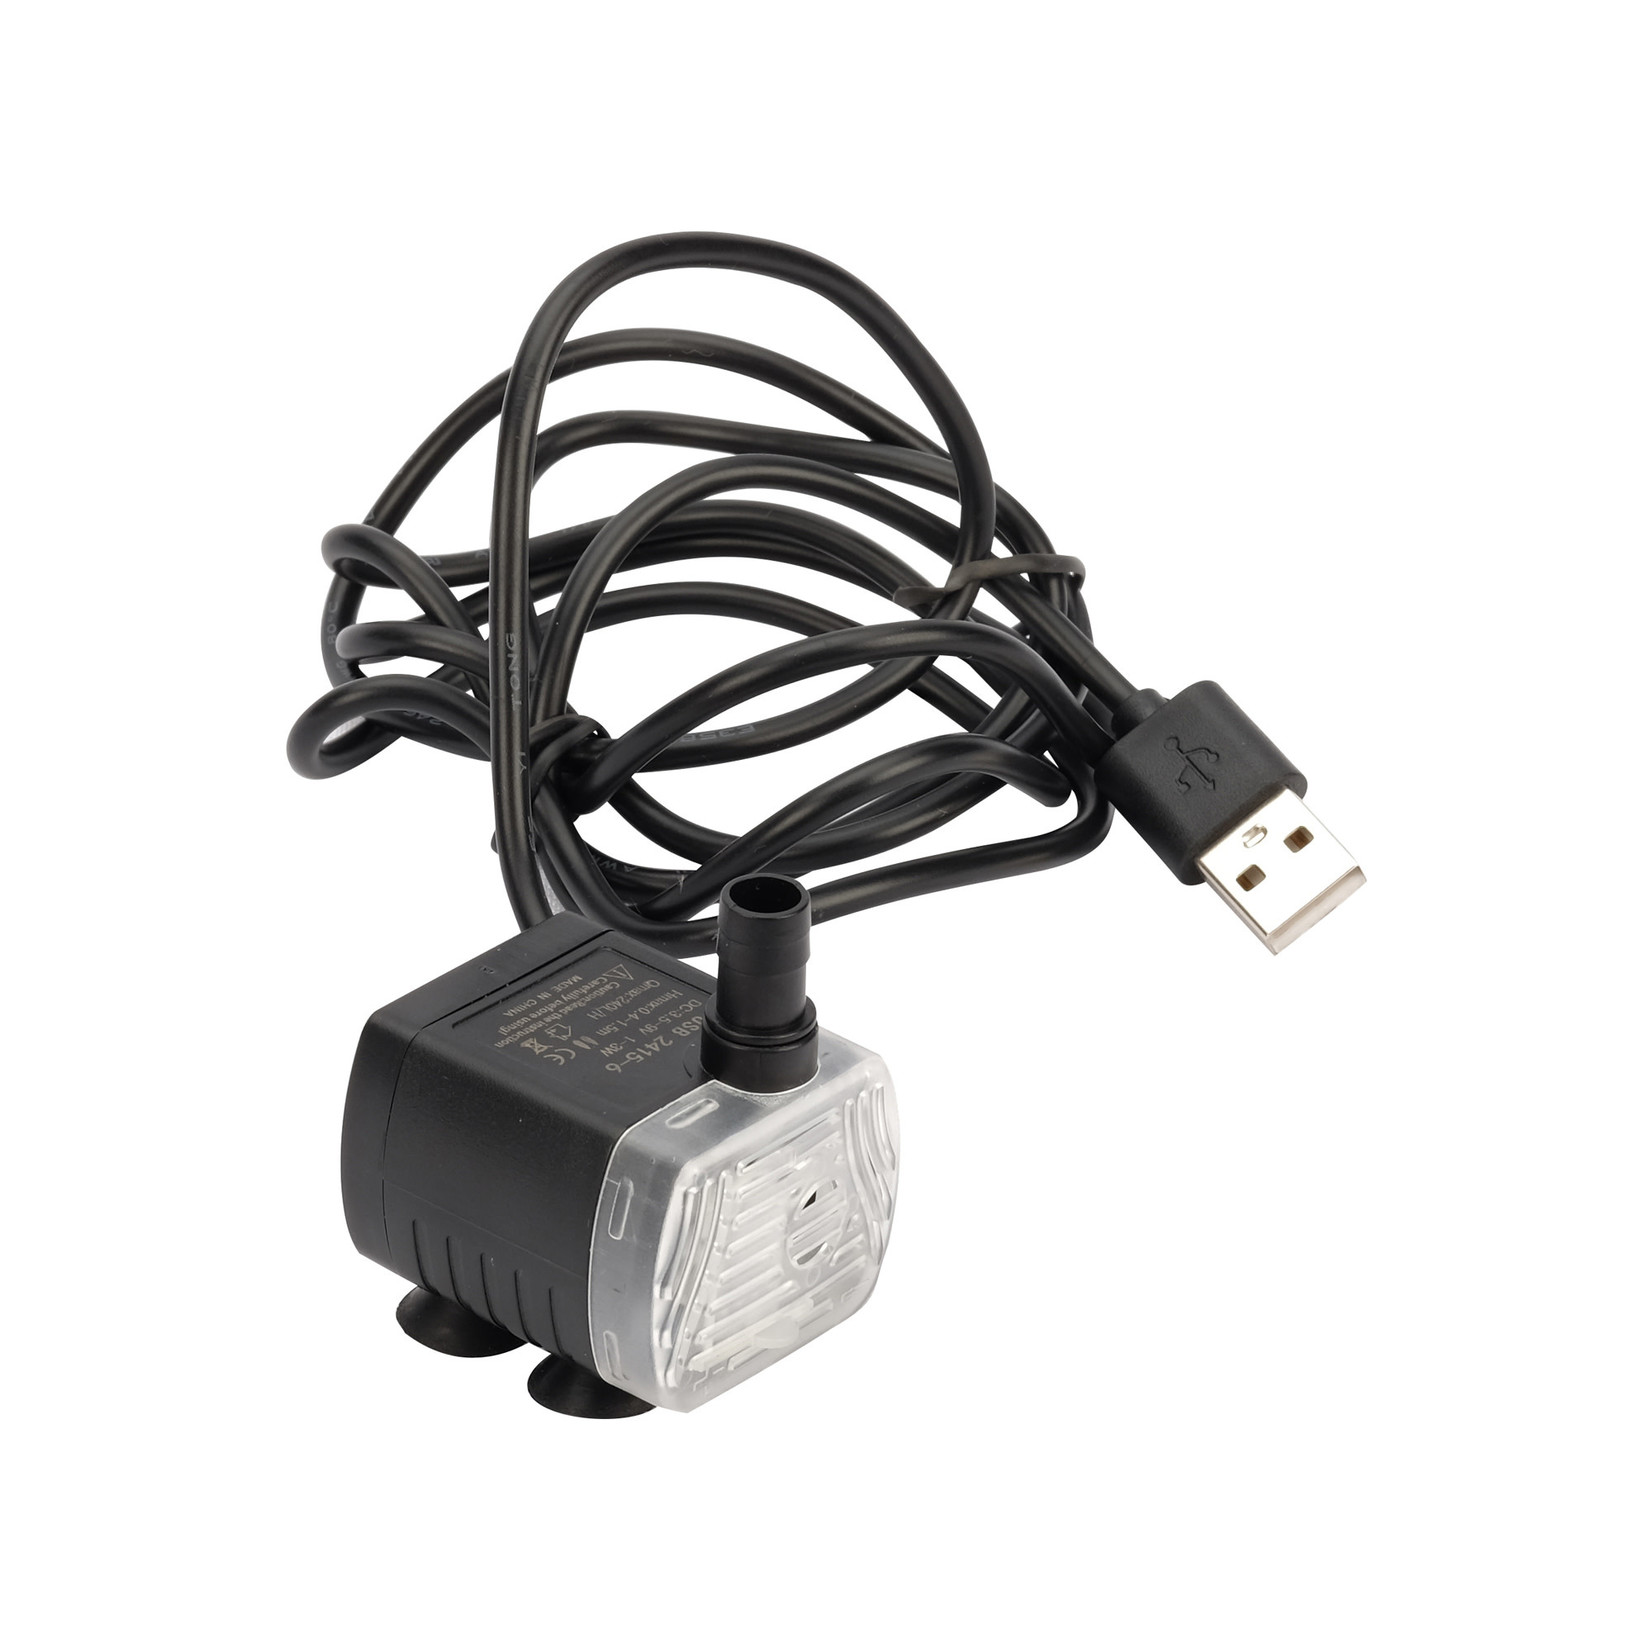 CatIt Replacement Water Pump -USB